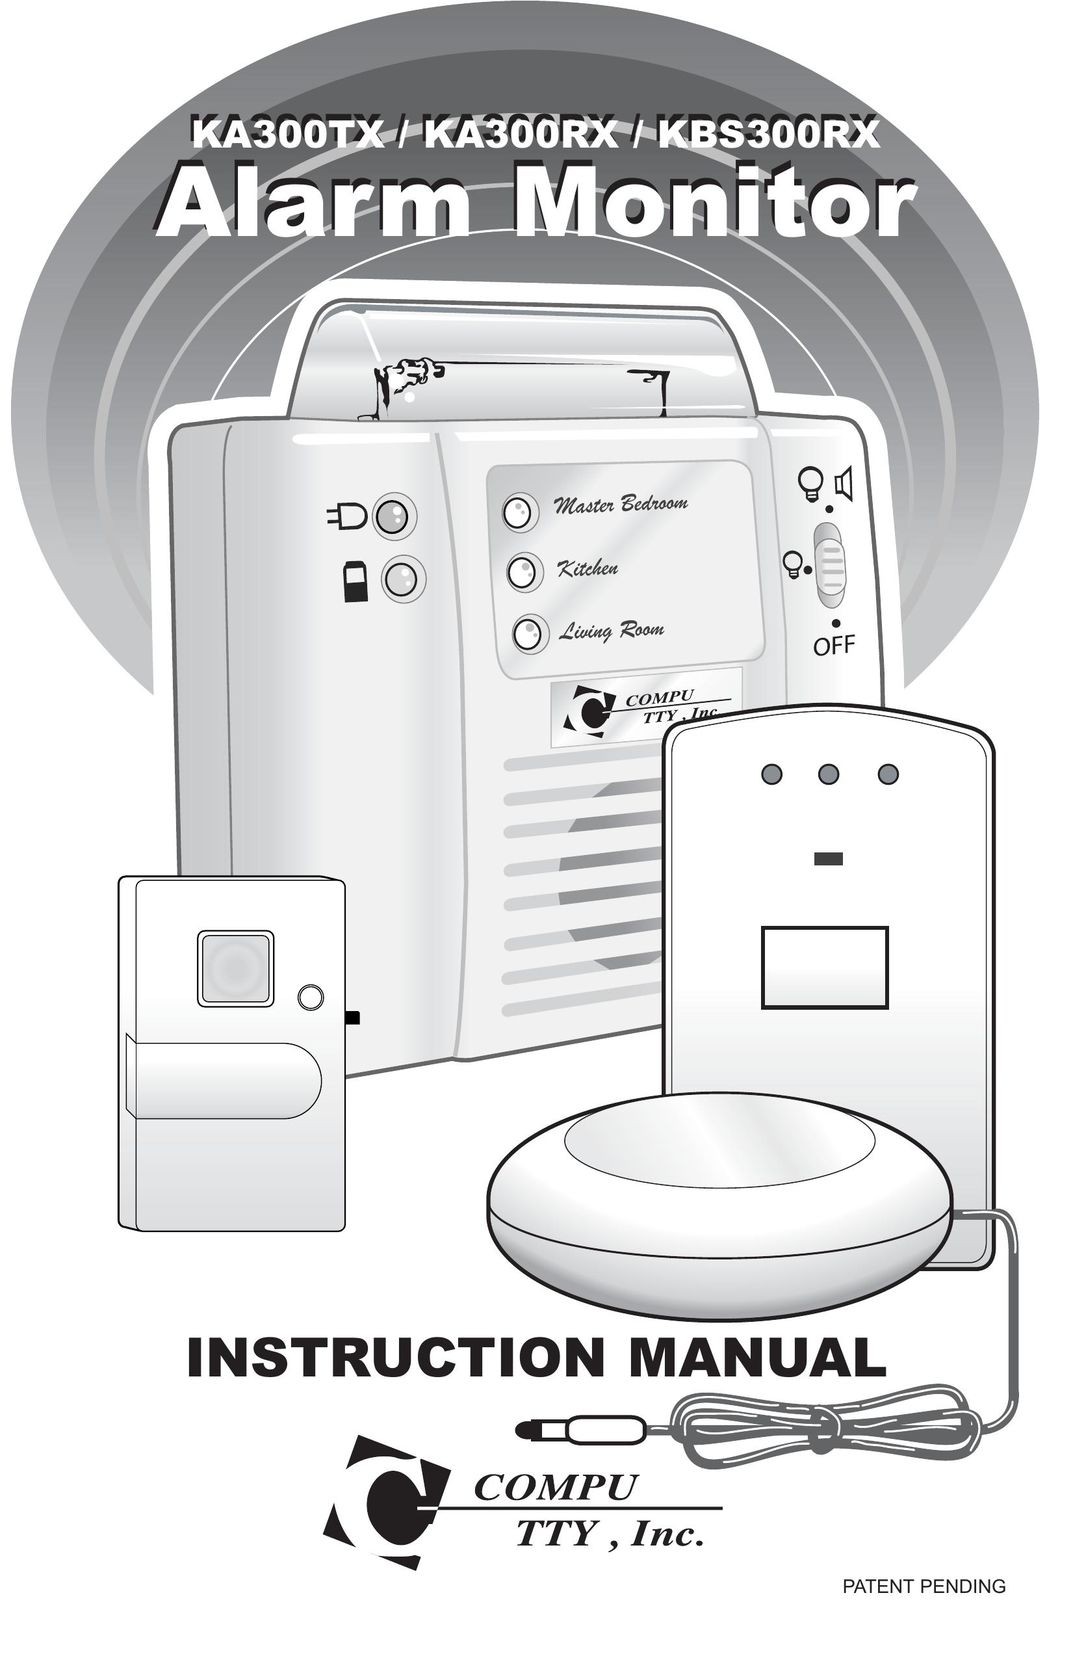 Krown Manufacturing KBS300RX Home Security System User Manual